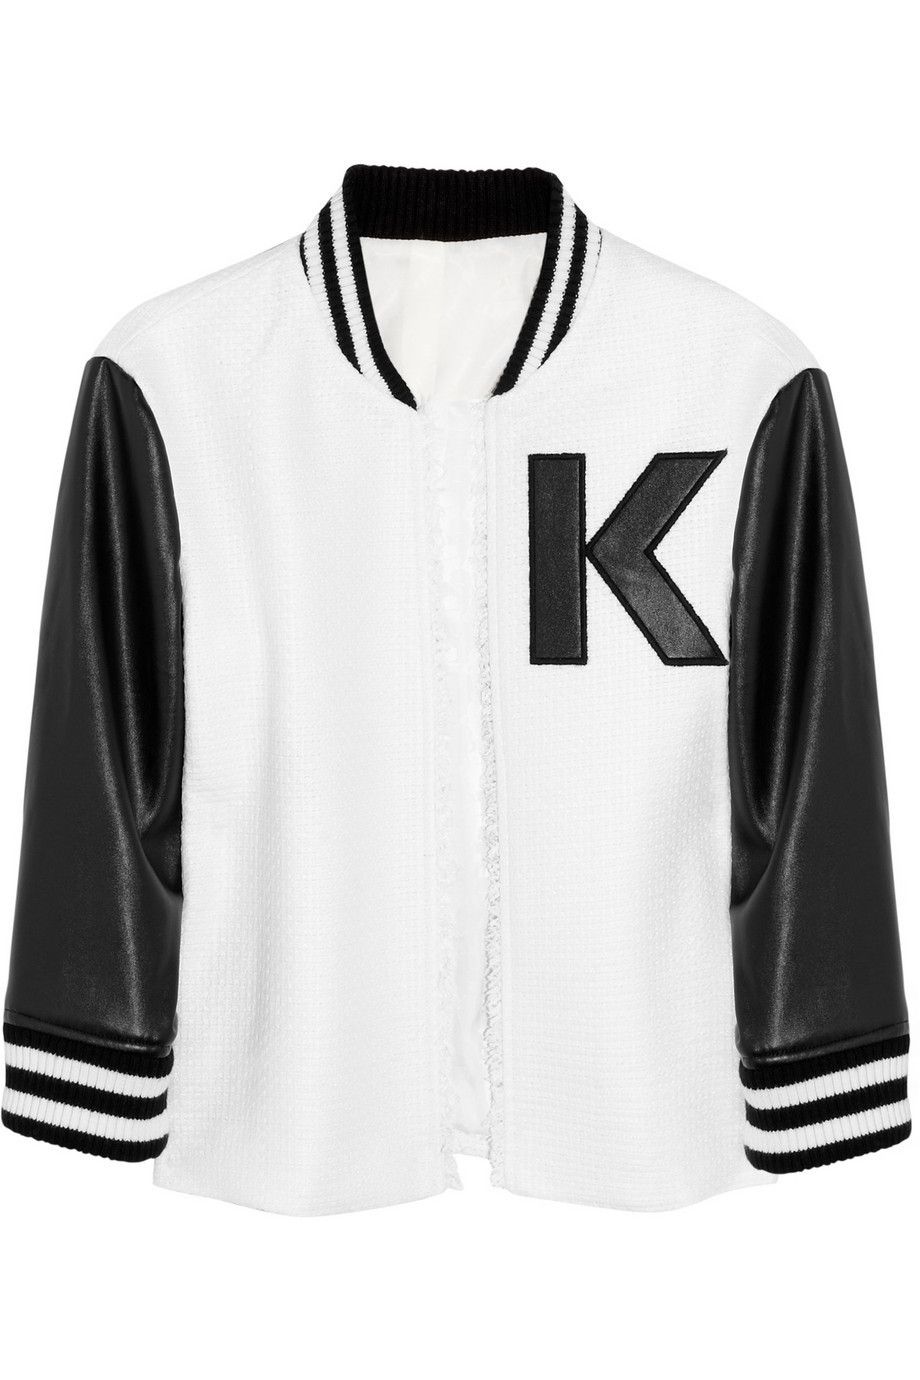 Product, Jersey, Collar, Sleeve, Sportswear, Textile, Outerwear, White, Uniform, Font, 